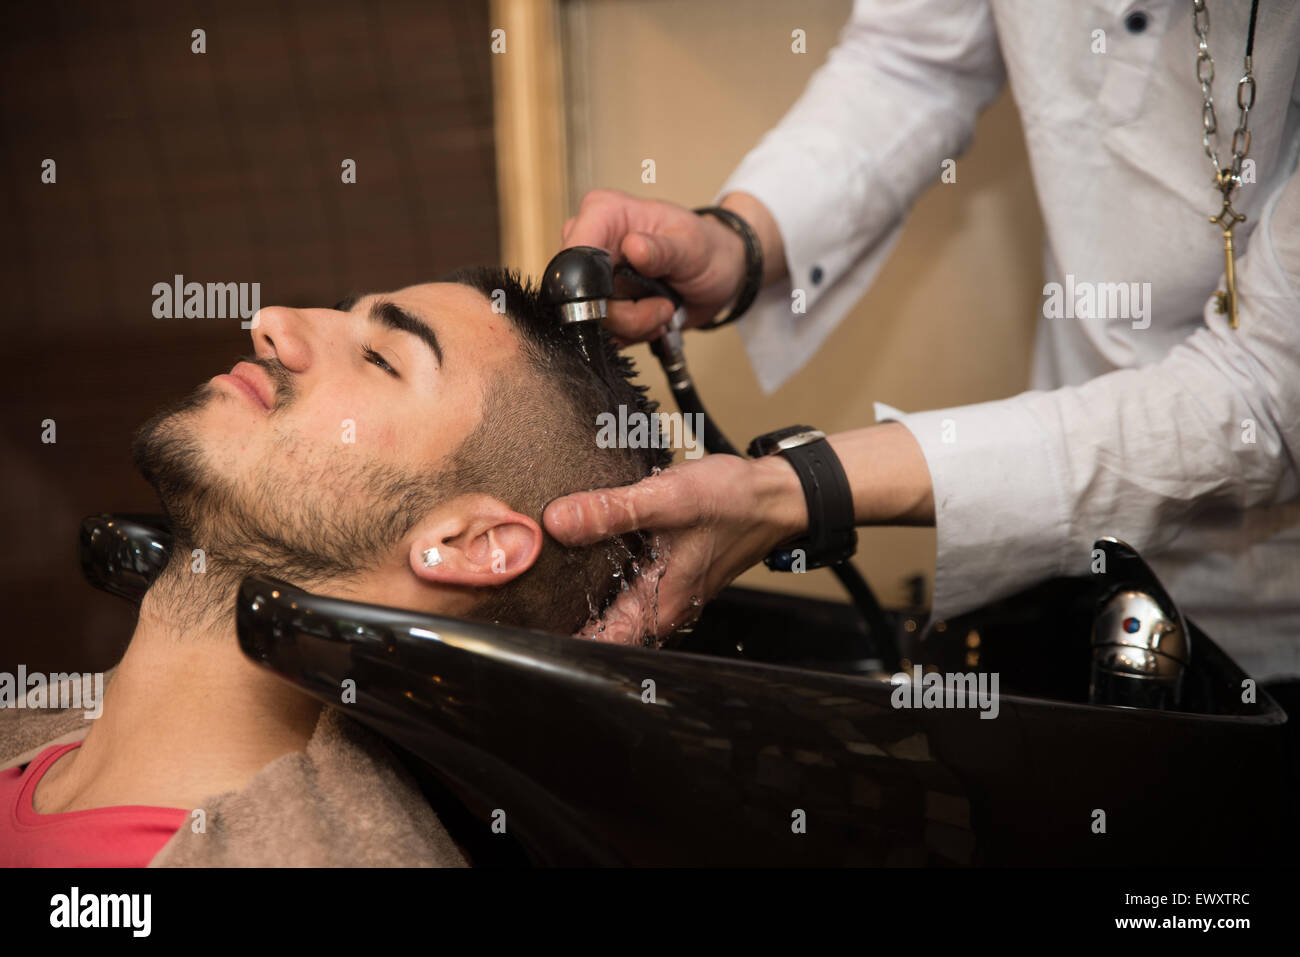 Hairstylist Hairdresser Washing Customer Hair - Young Man Relaxing In Hairdressing Beauty Salon Stock Photo